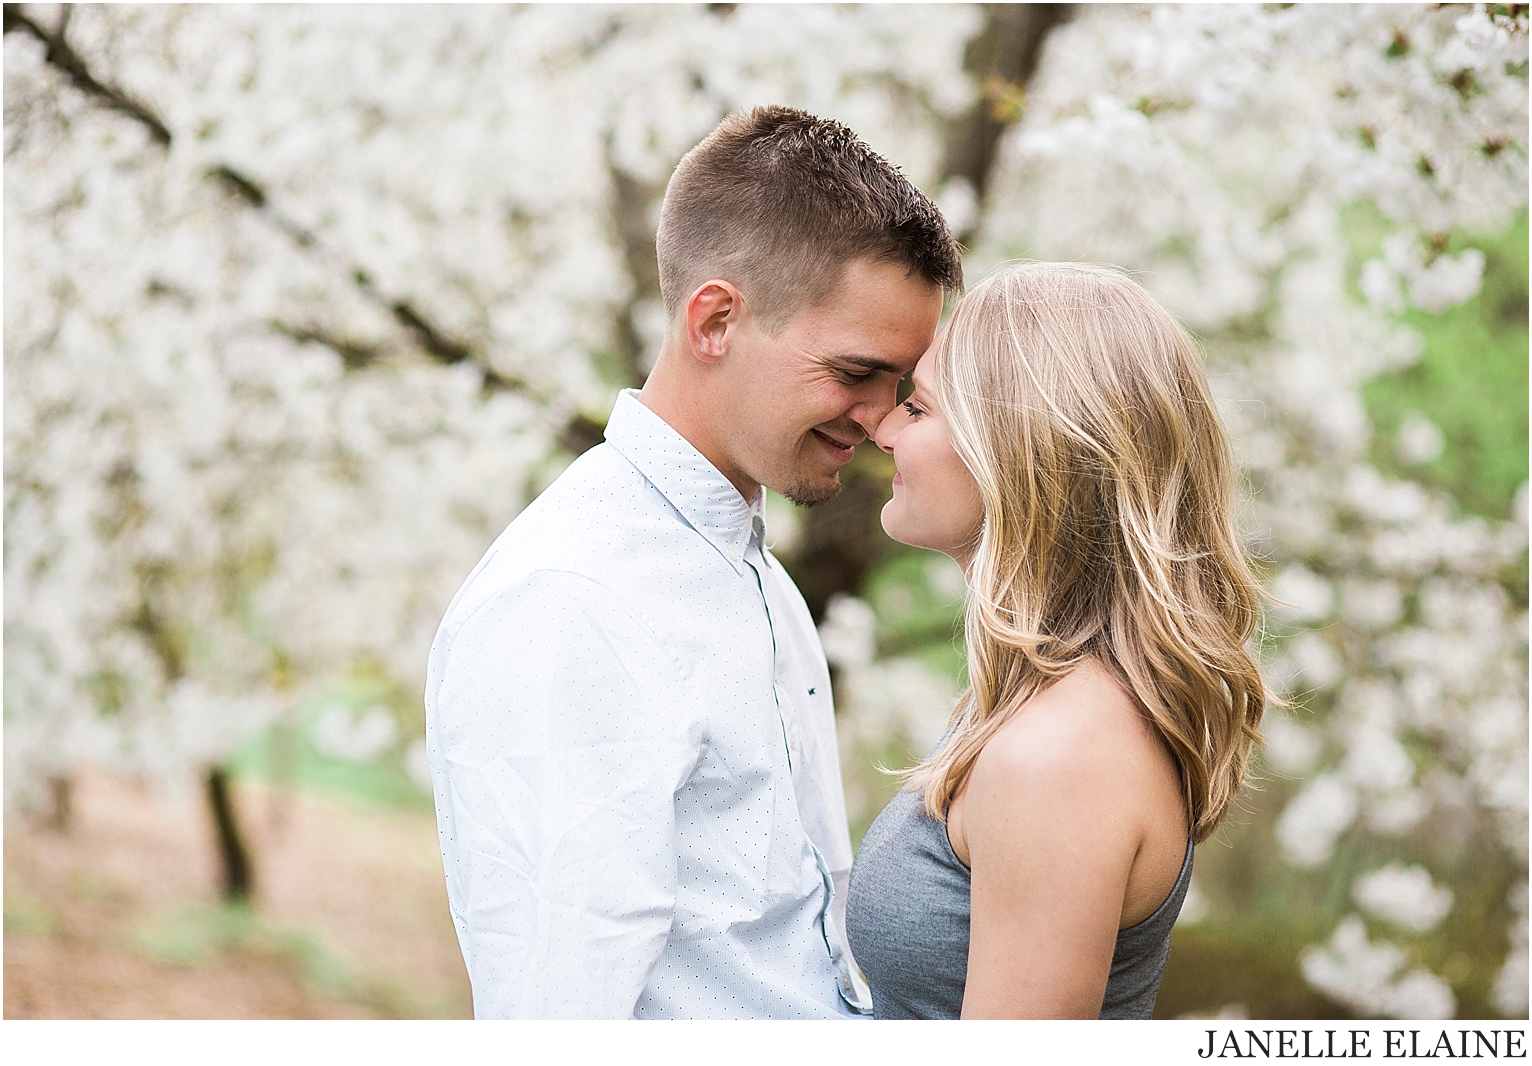 tricia and nate engagement photos-janelle elaine photography-109.jpg